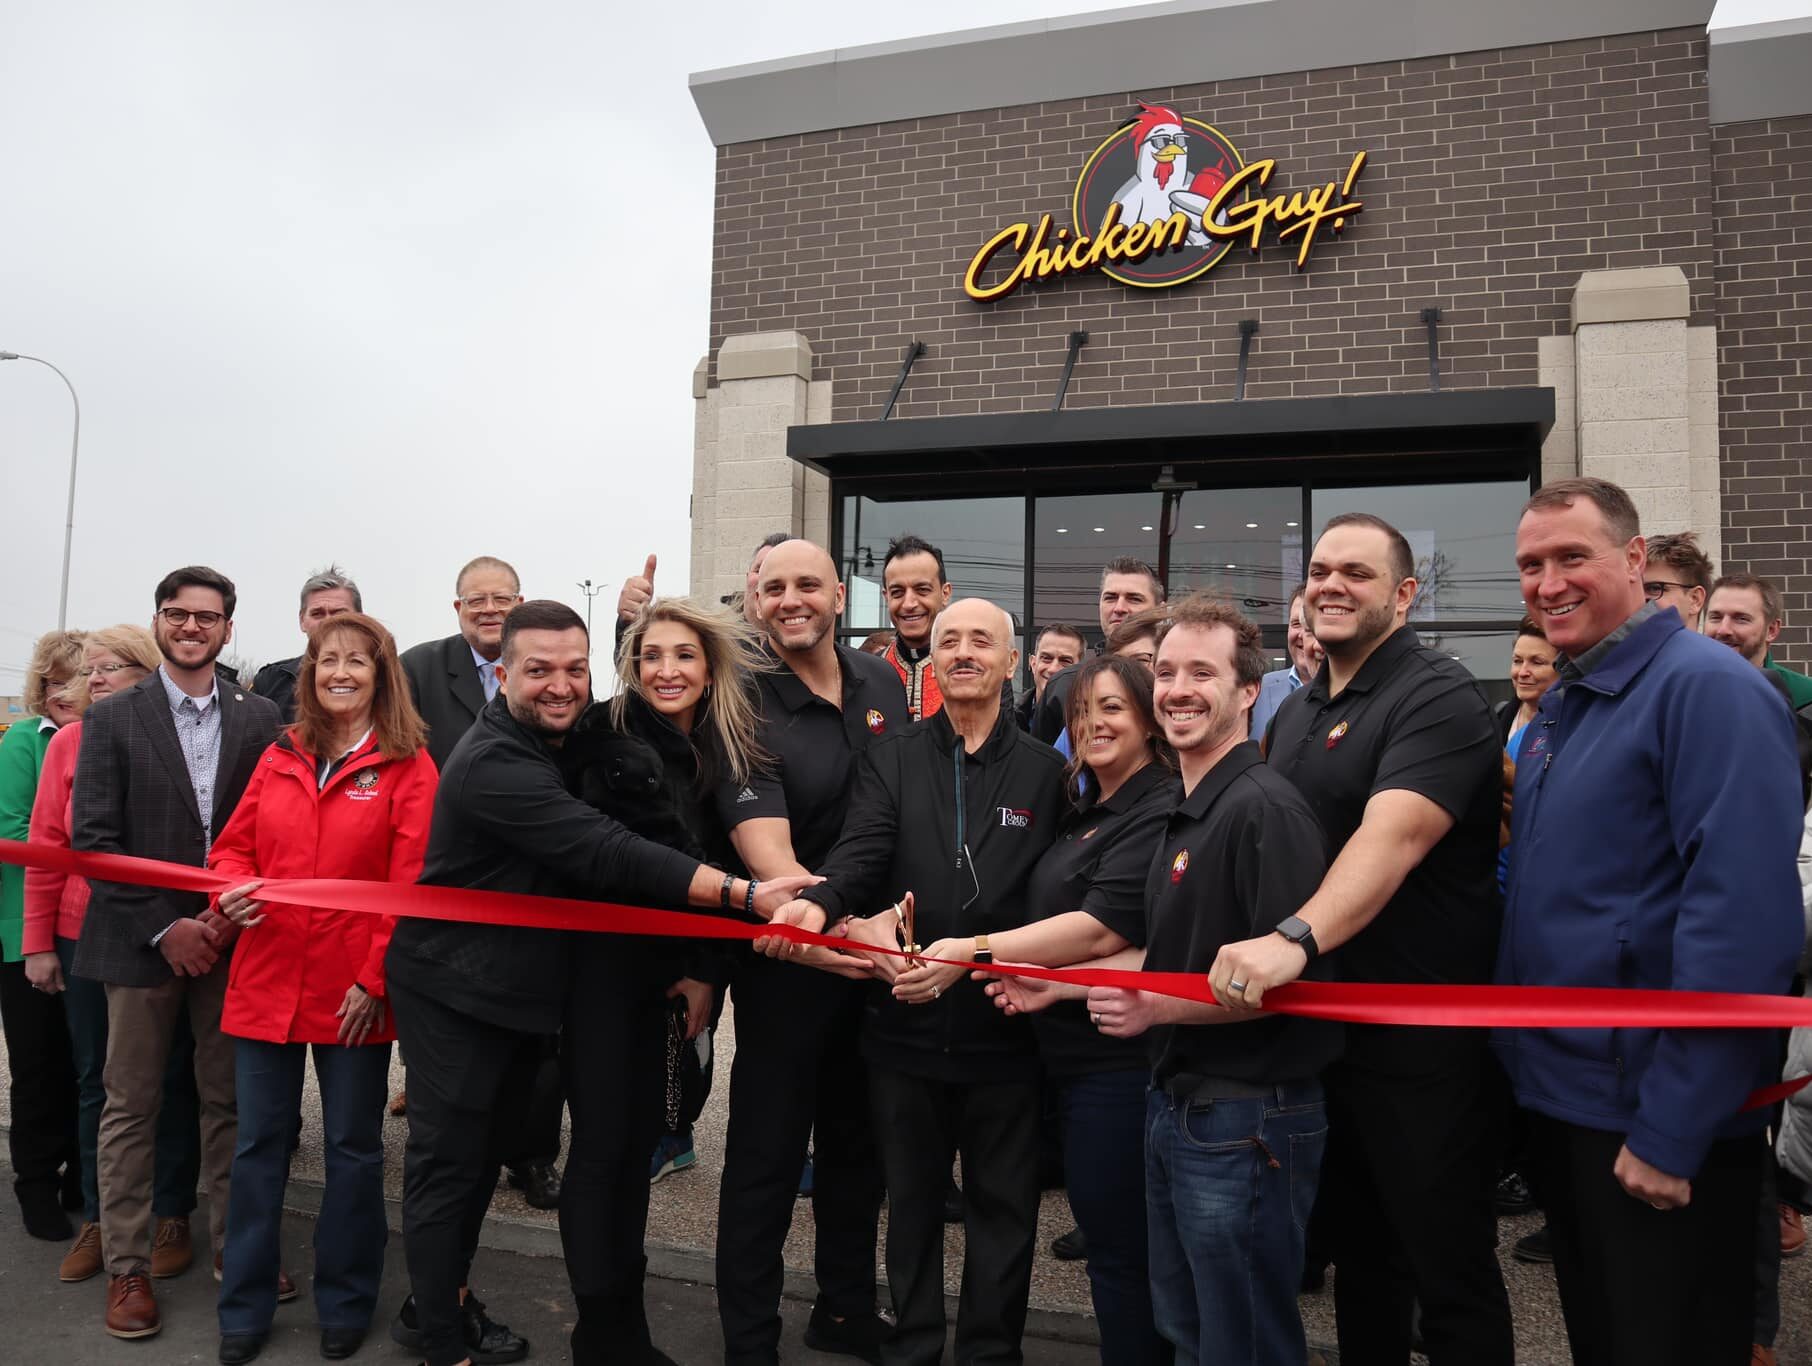 Members of The Tomey Group and the Livonia Chamber of Commerce are pictured during the Chicken Guy! ribbon-cutting ceremony.